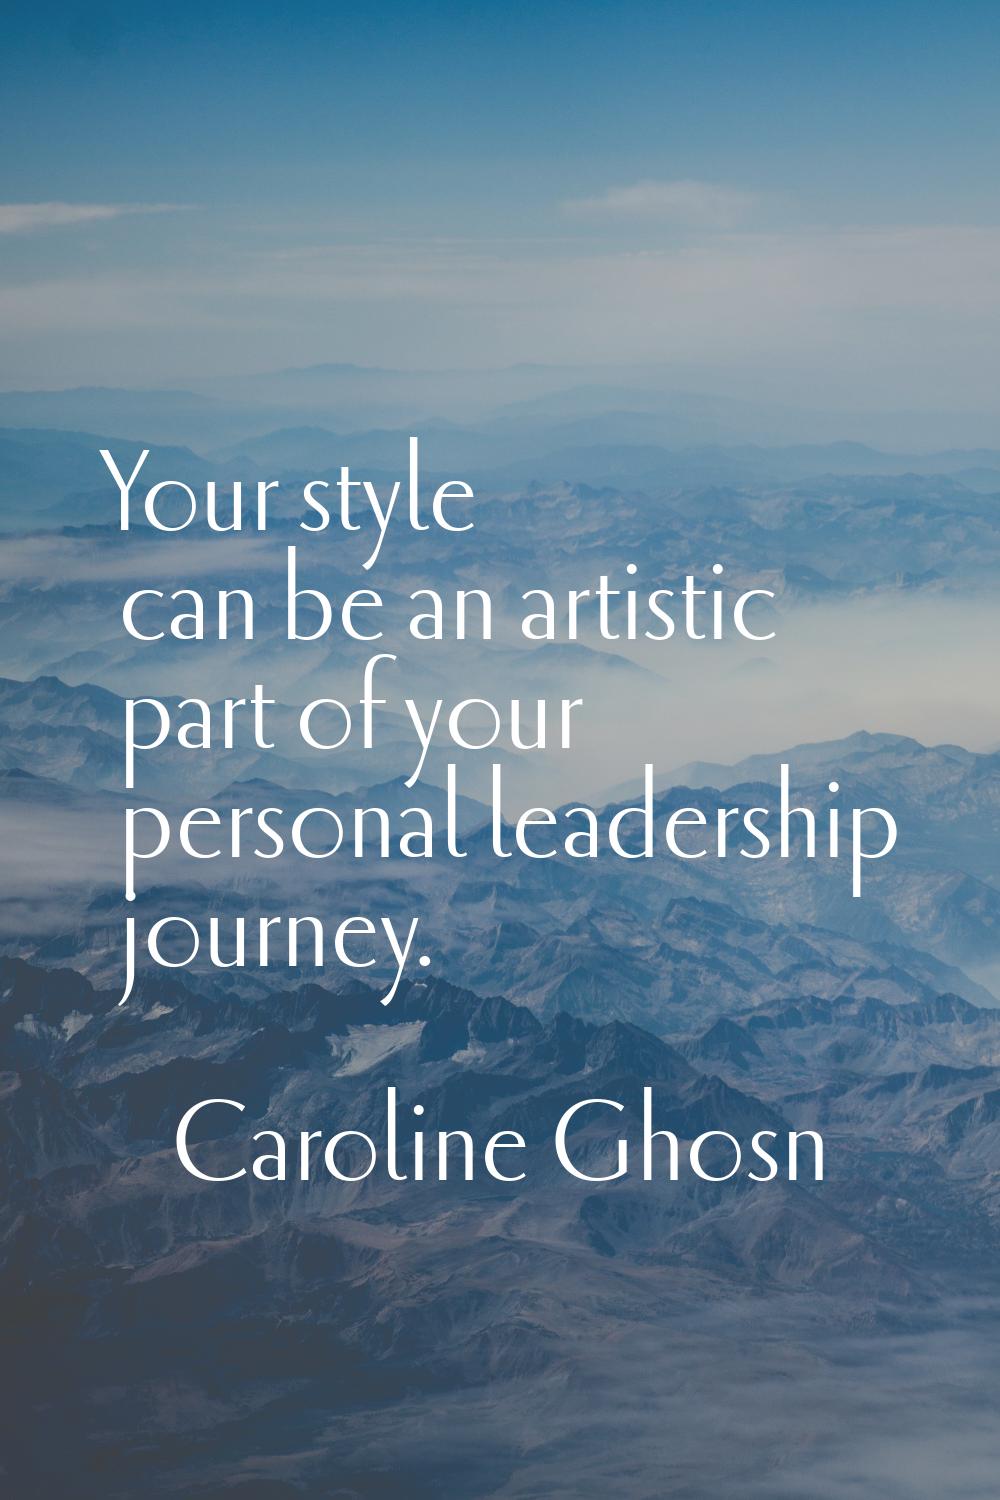 Your style can be an artistic part of your personal leadership journey.